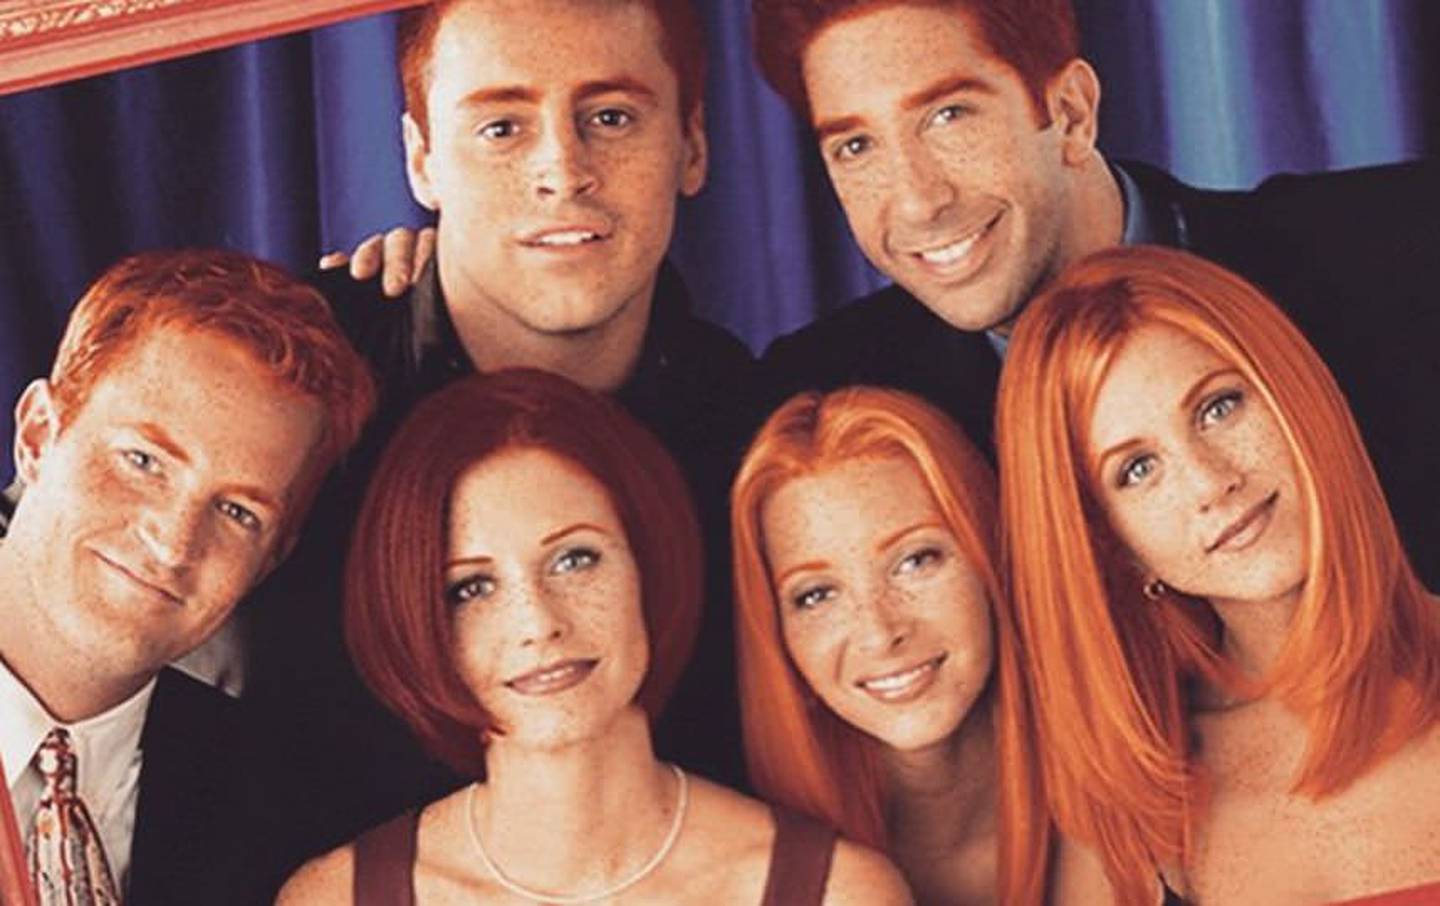 What would have happened if the 'Friends' characters had had children in the series? This is how artificial intelligence shows them